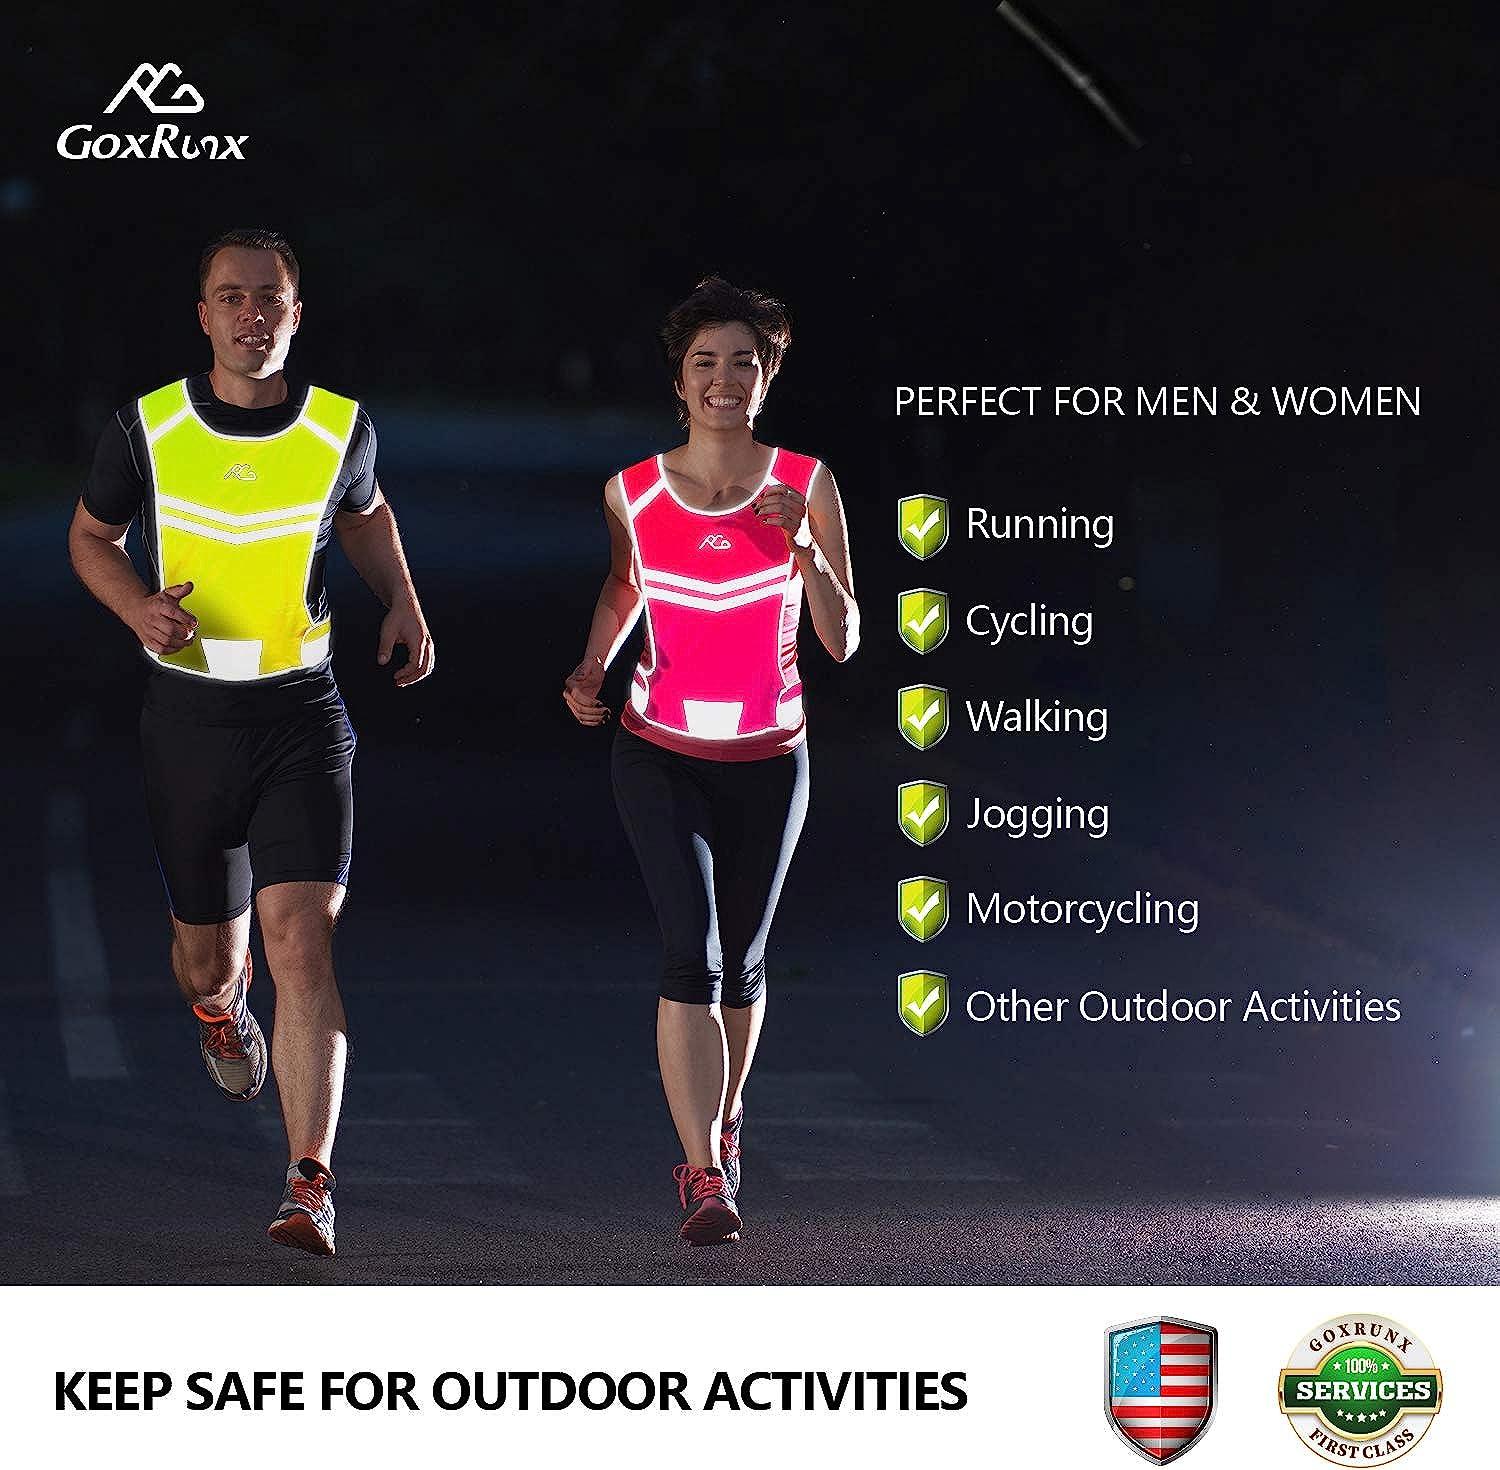 Reflective Running Vest Gear Cycling Motorcycle Reflective Vest,High  Visibility Night Running Safety Vest,Fluorescent yellow，G185856 